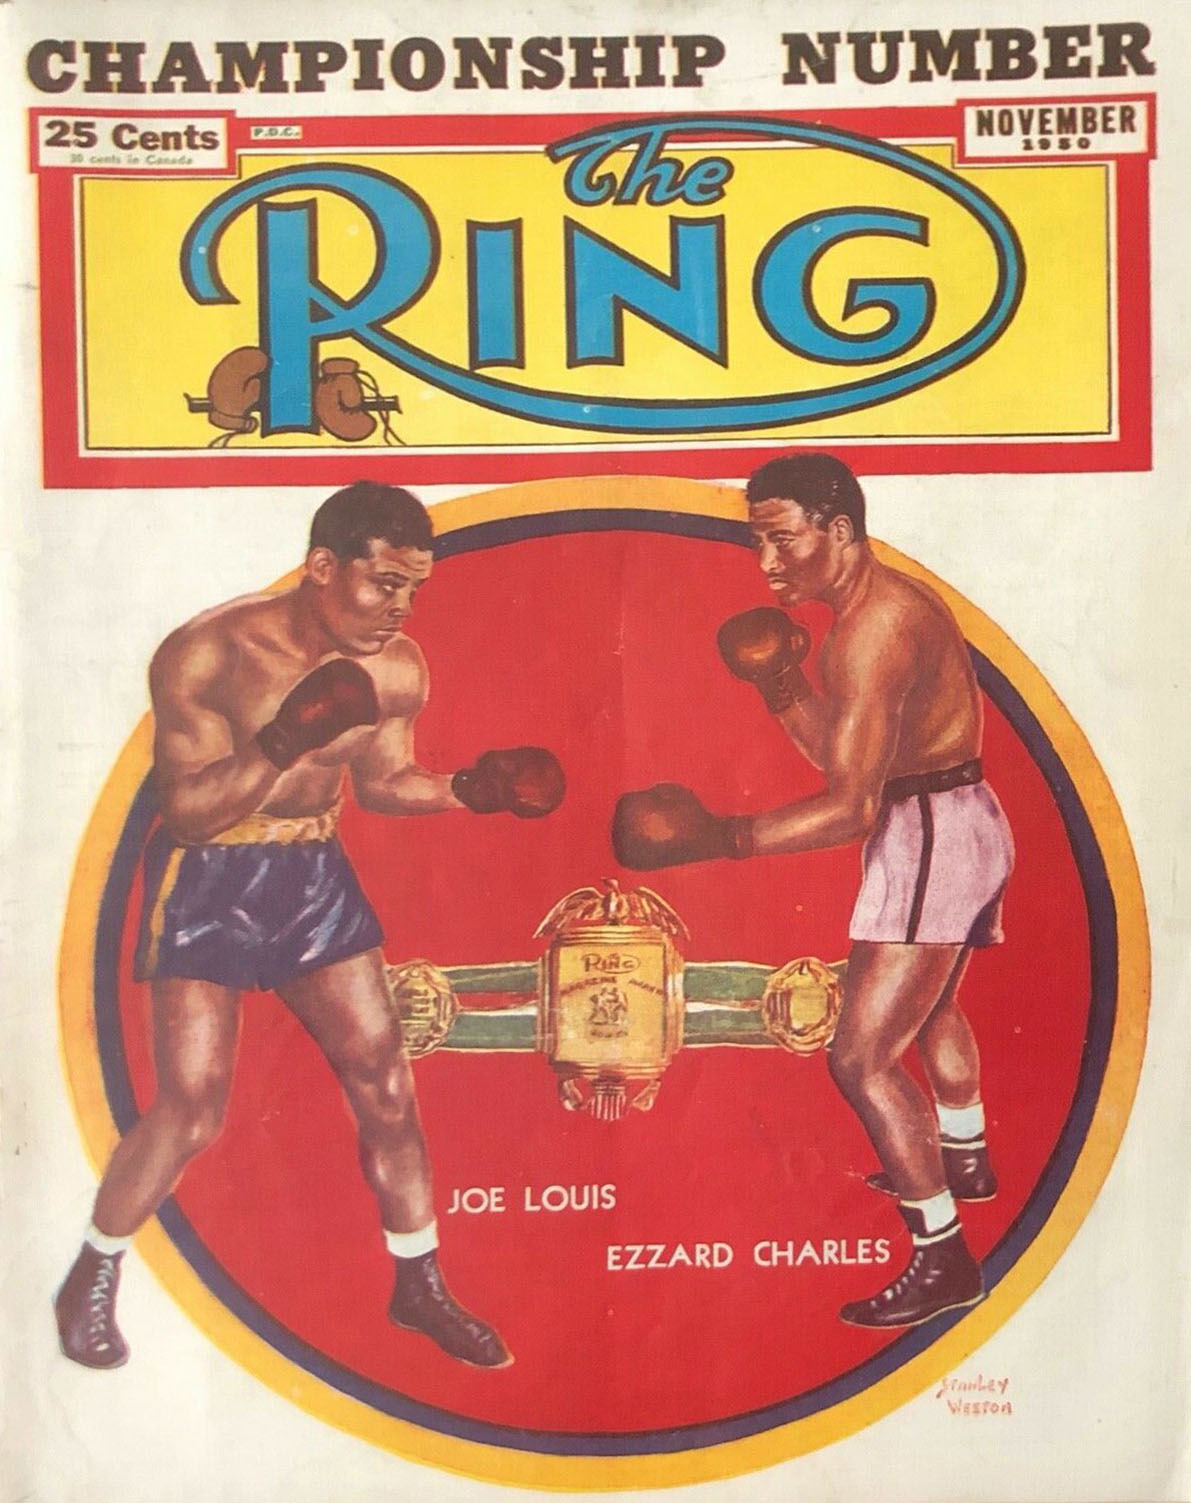 Ring, The November 1950, Ring, The November 1950 American boxing magazine back issue first published in 1922 by Sports & Entertainment Publications.  Championship Number., Championship Number